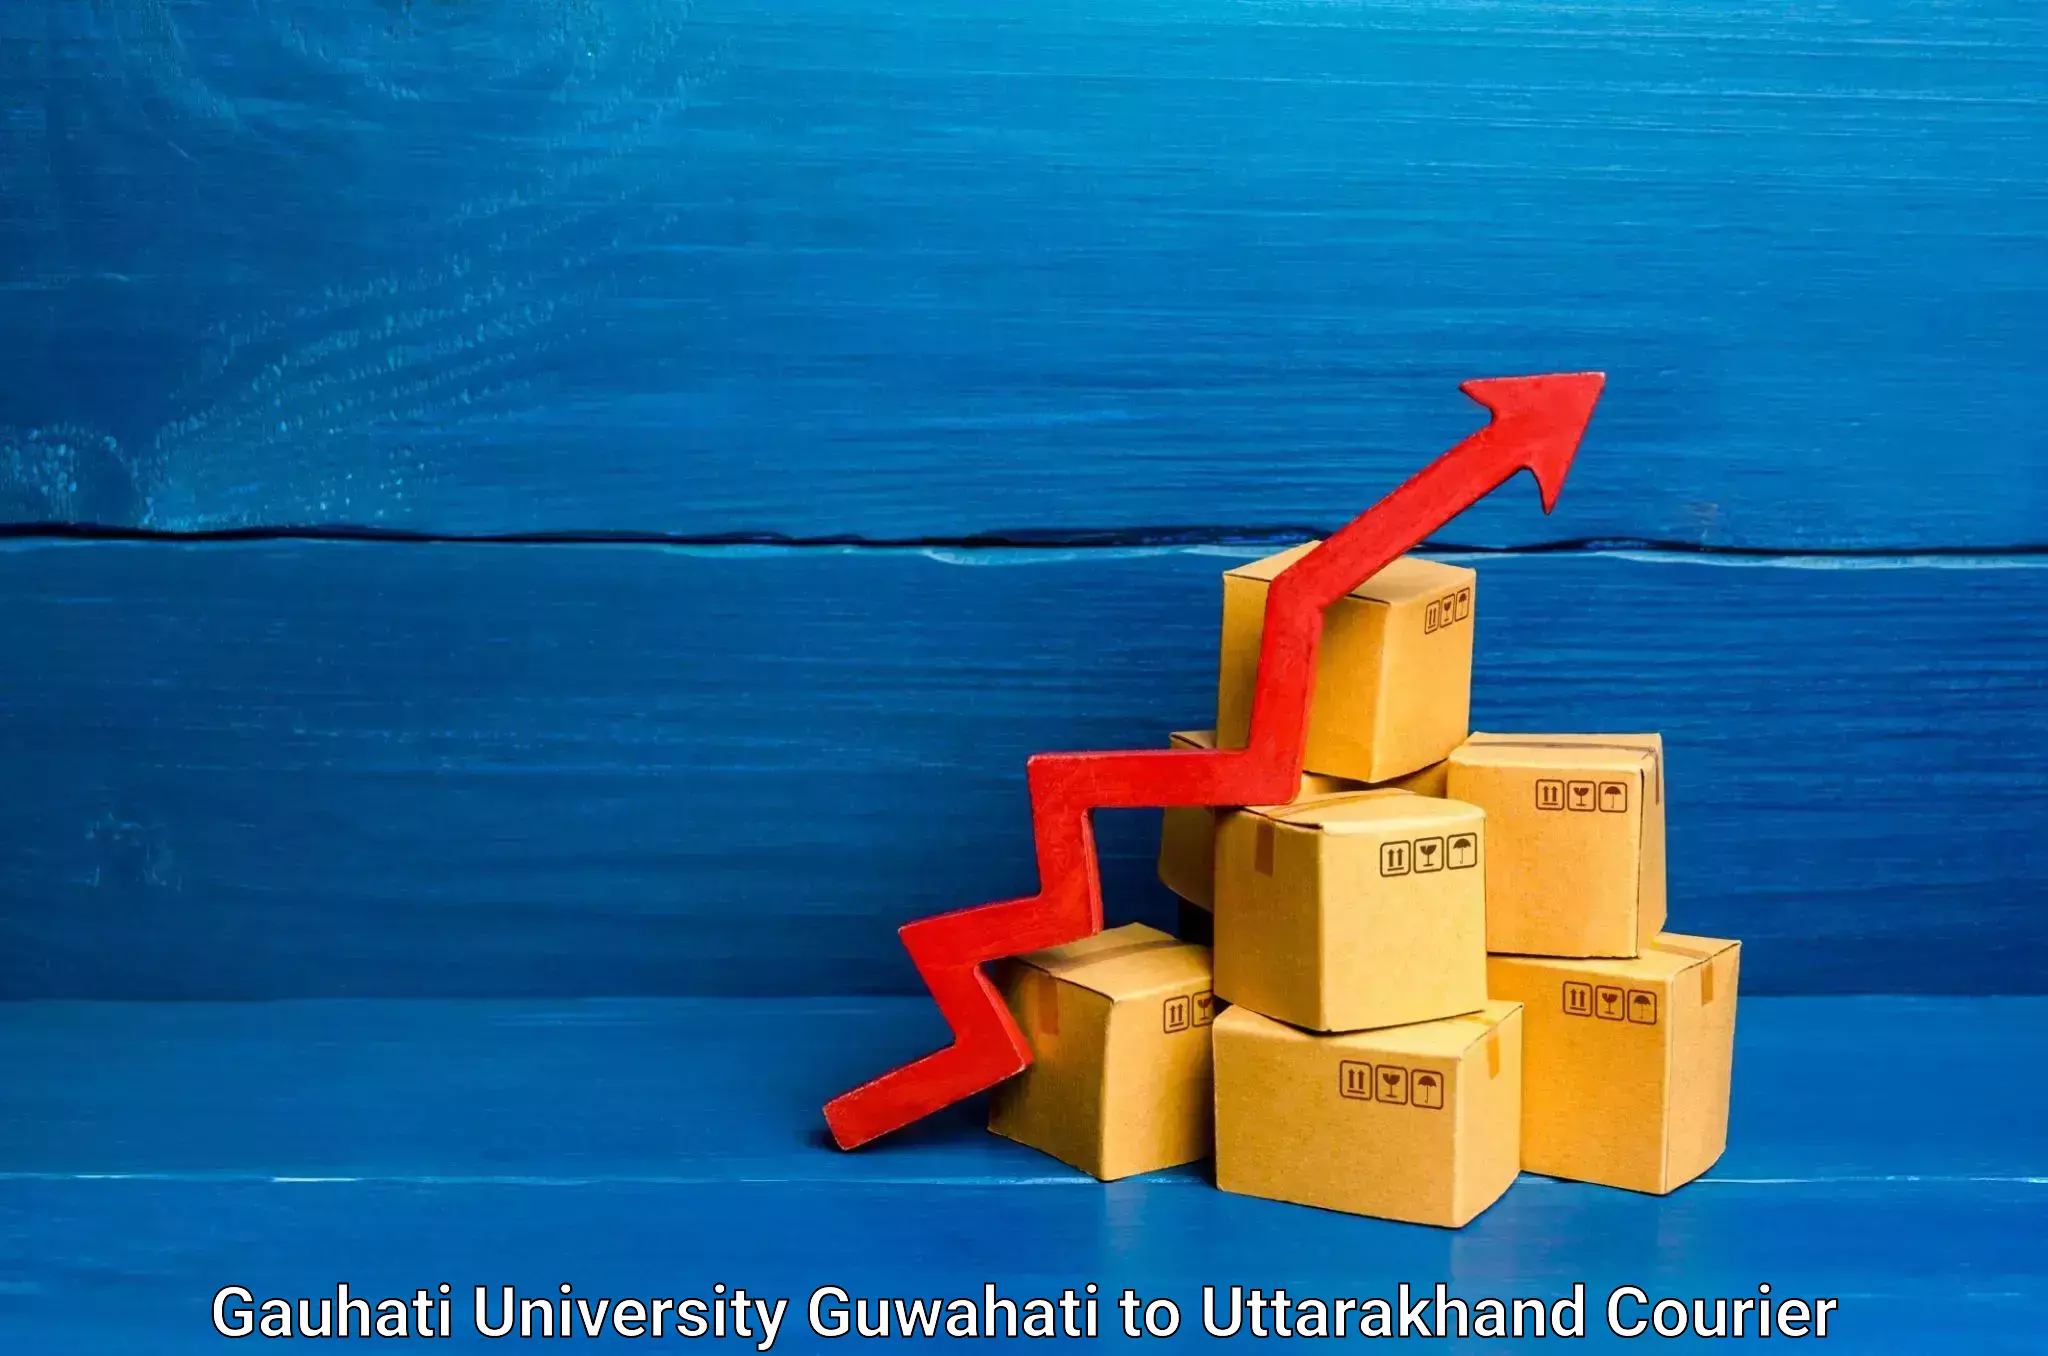 Express delivery solutions Gauhati University Guwahati to Almora